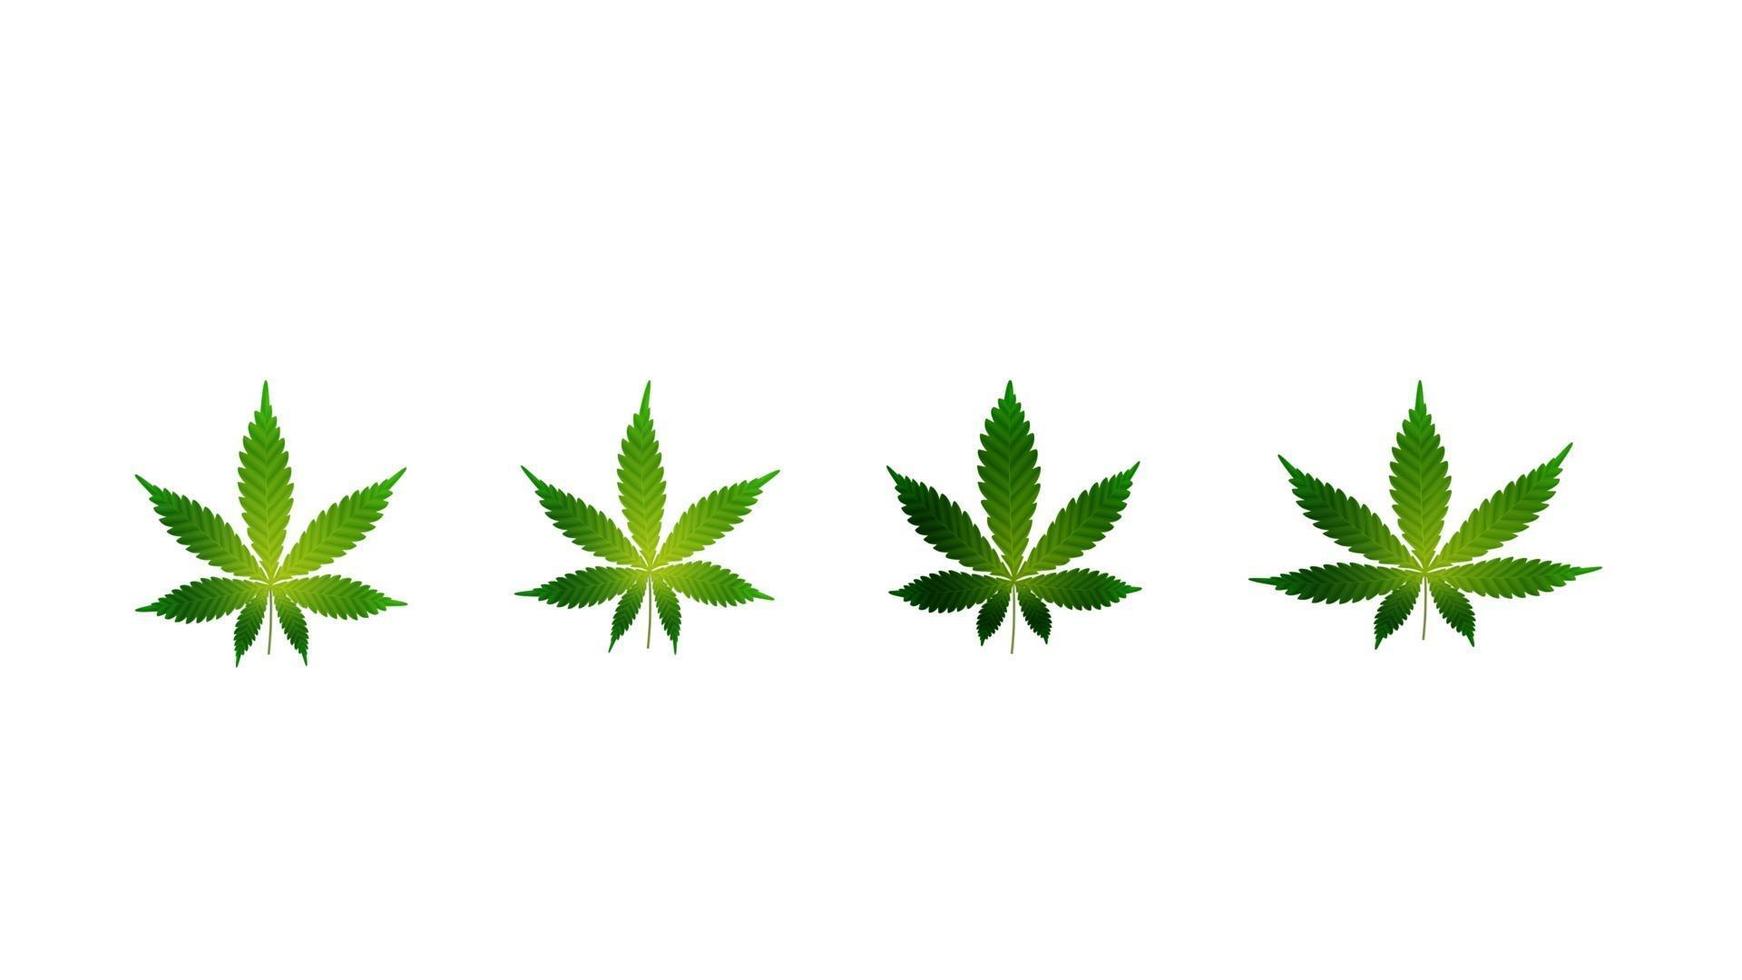 Green leaves of cannabis. Set of cannabis leafs isolated on a white background vector